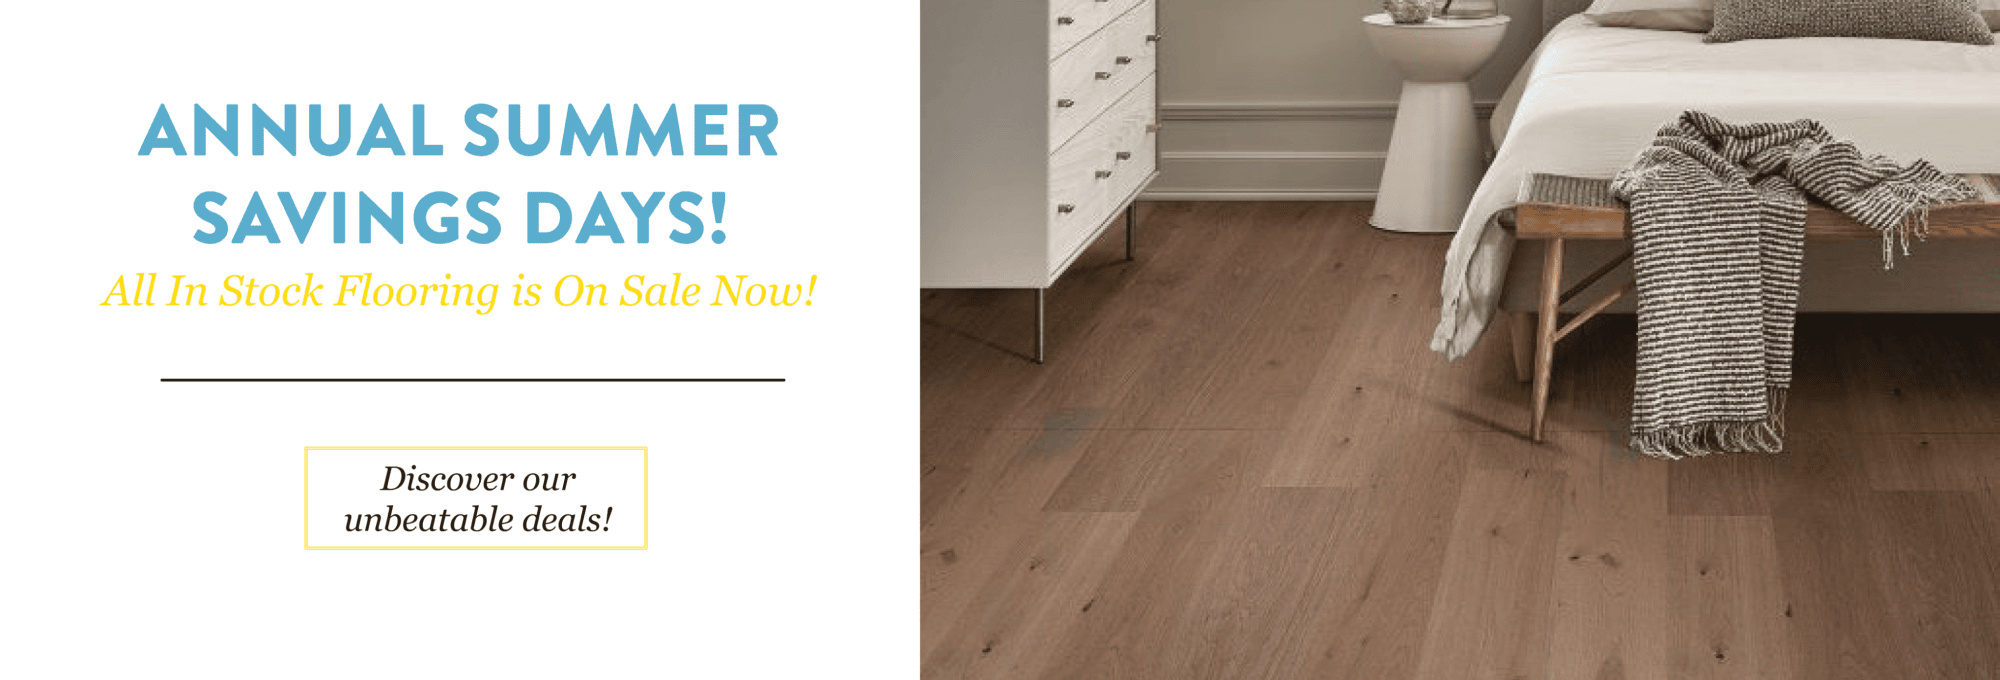 Floors USA | Check out our summer sale |Serving the King of Prussia, PA area